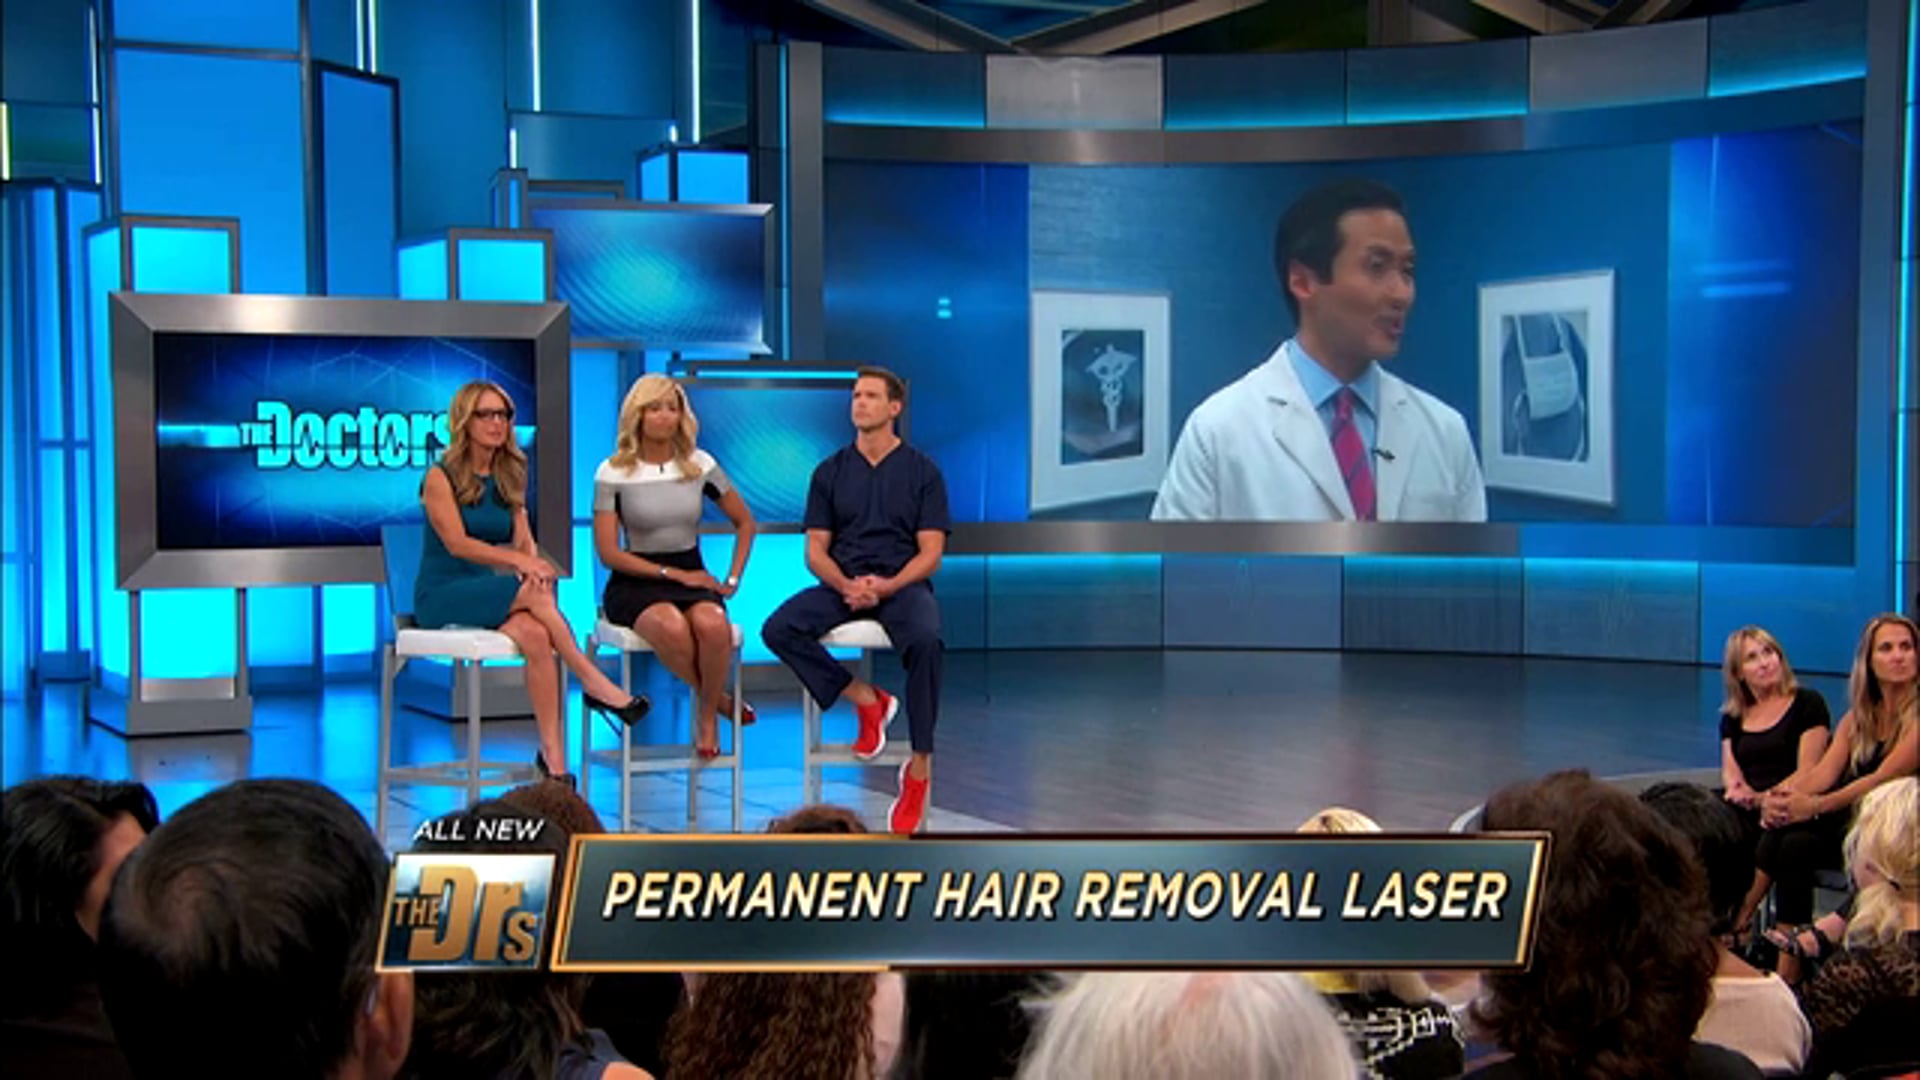 Diolaze - Laser Hair Removal Featured on The Doctors